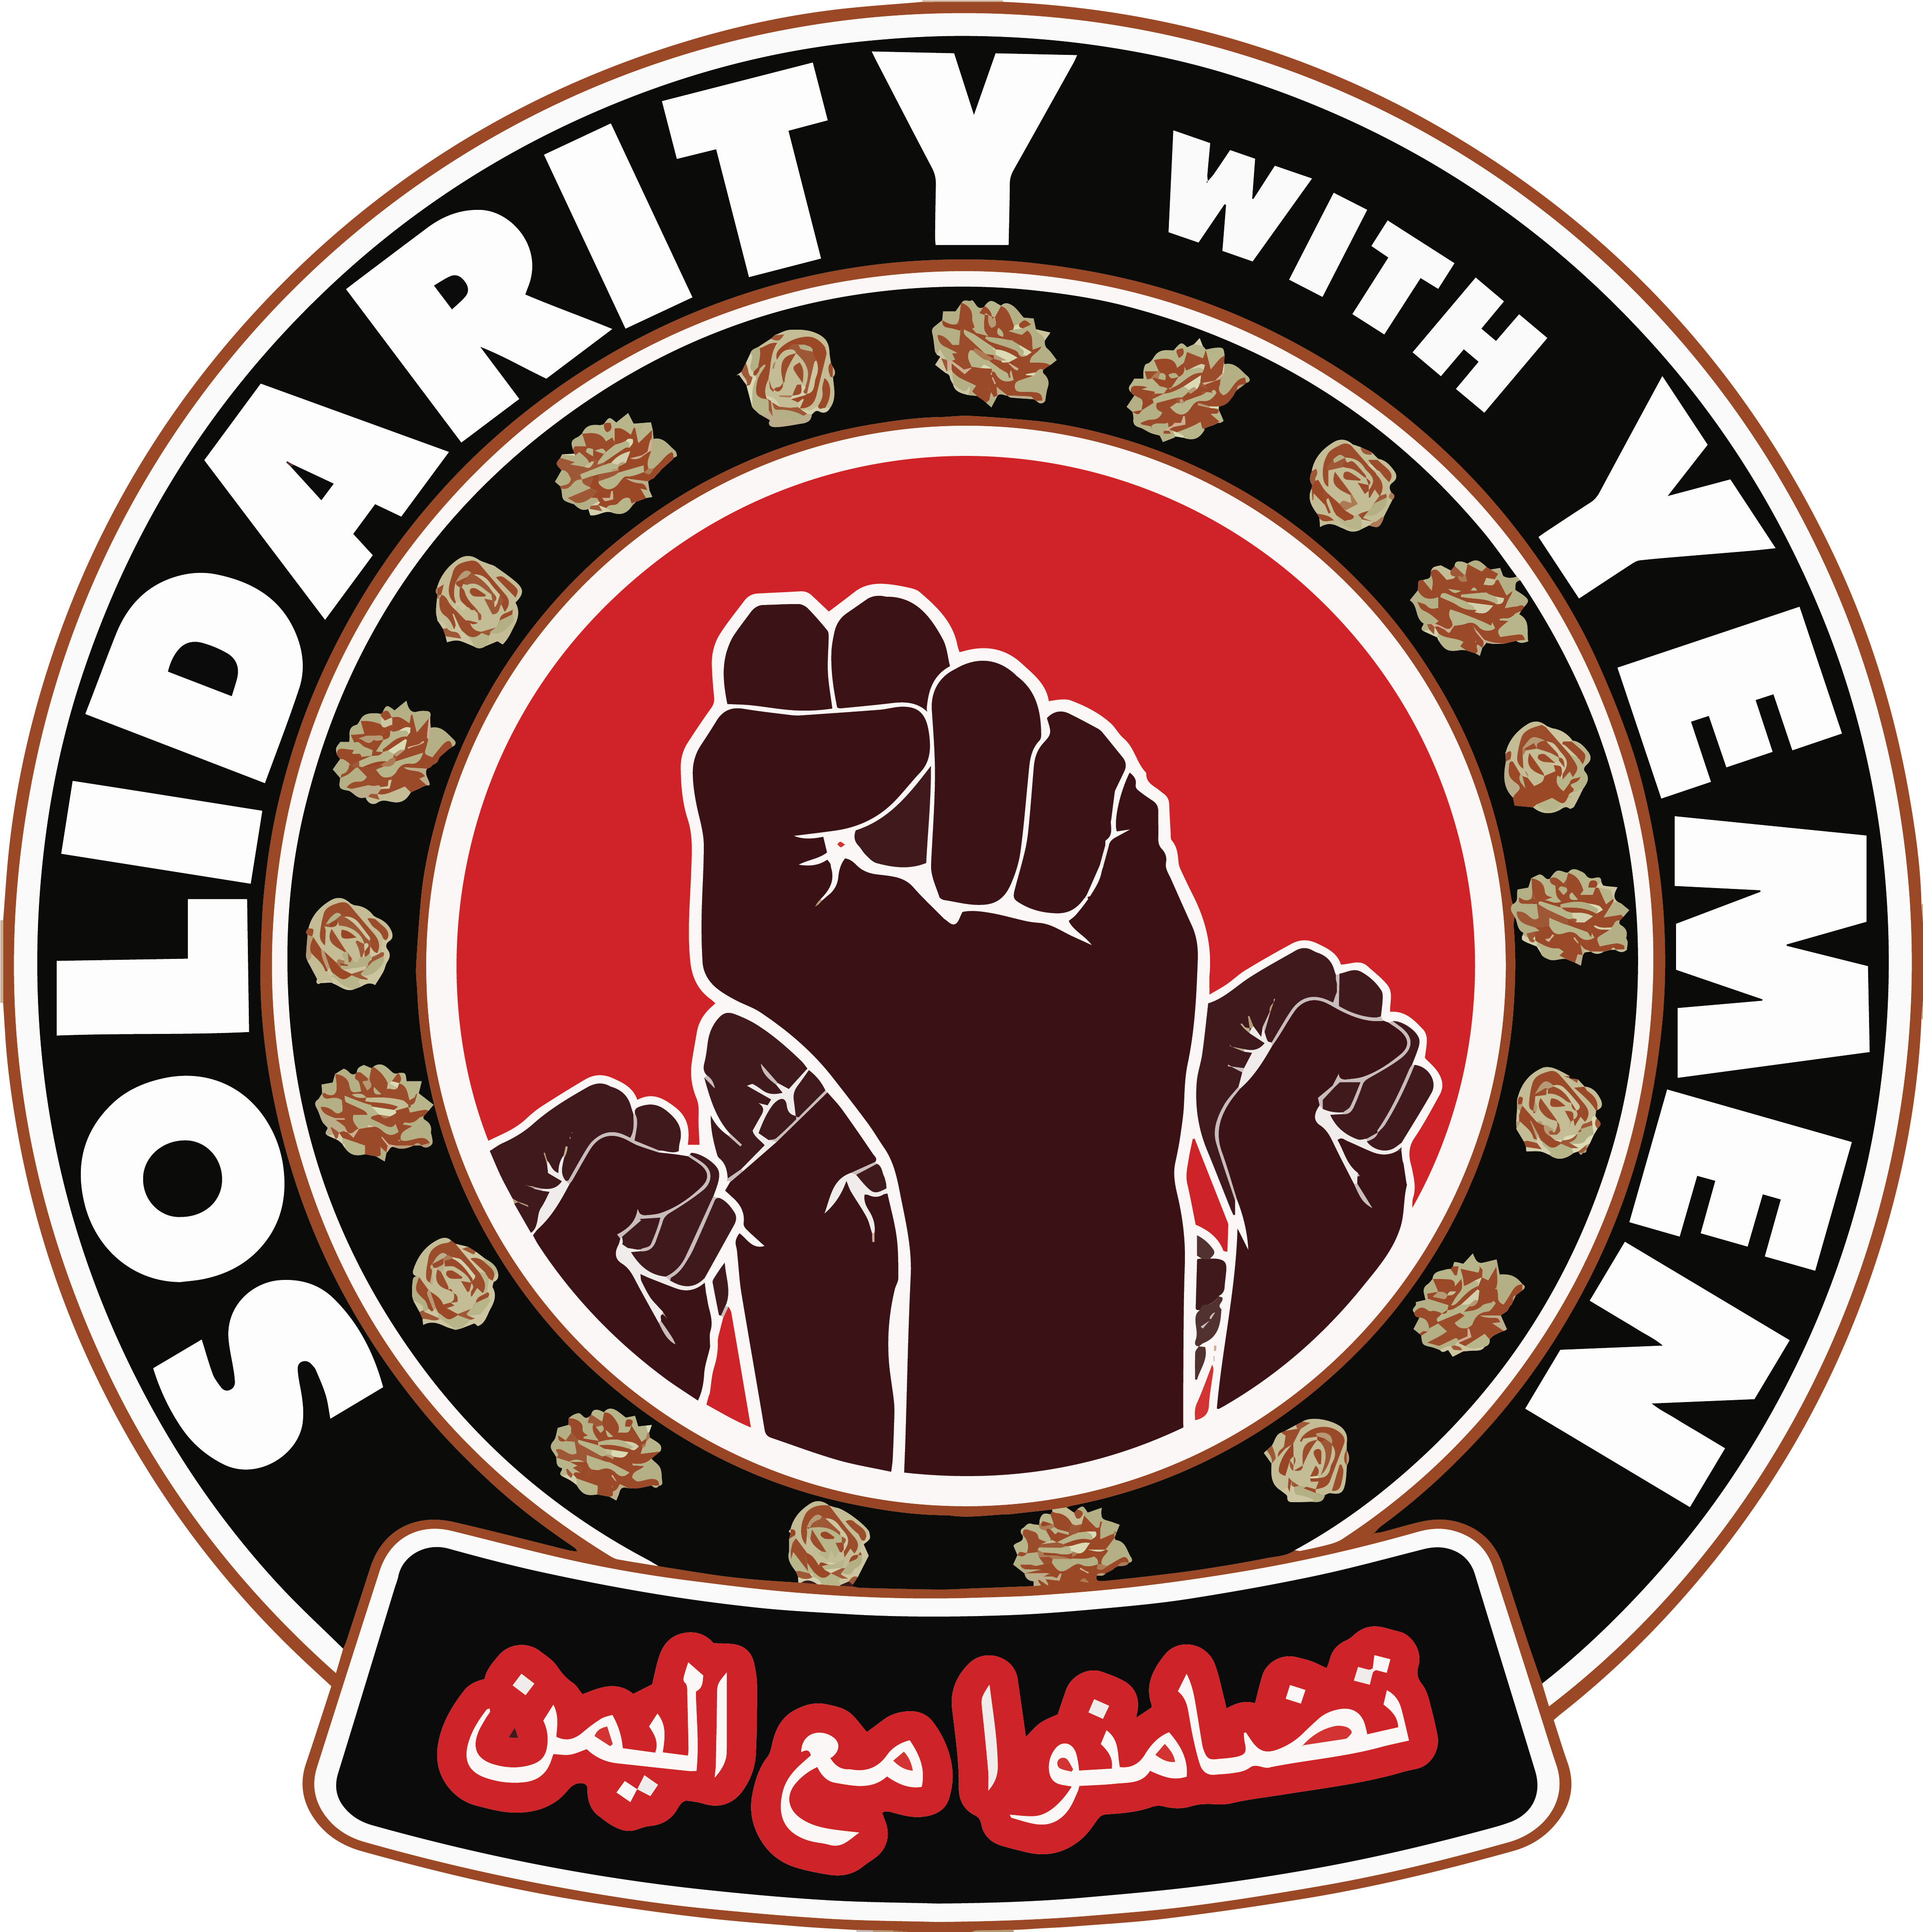 'Solidarity With Yemen'  in English and Arabic circular logo with white text 